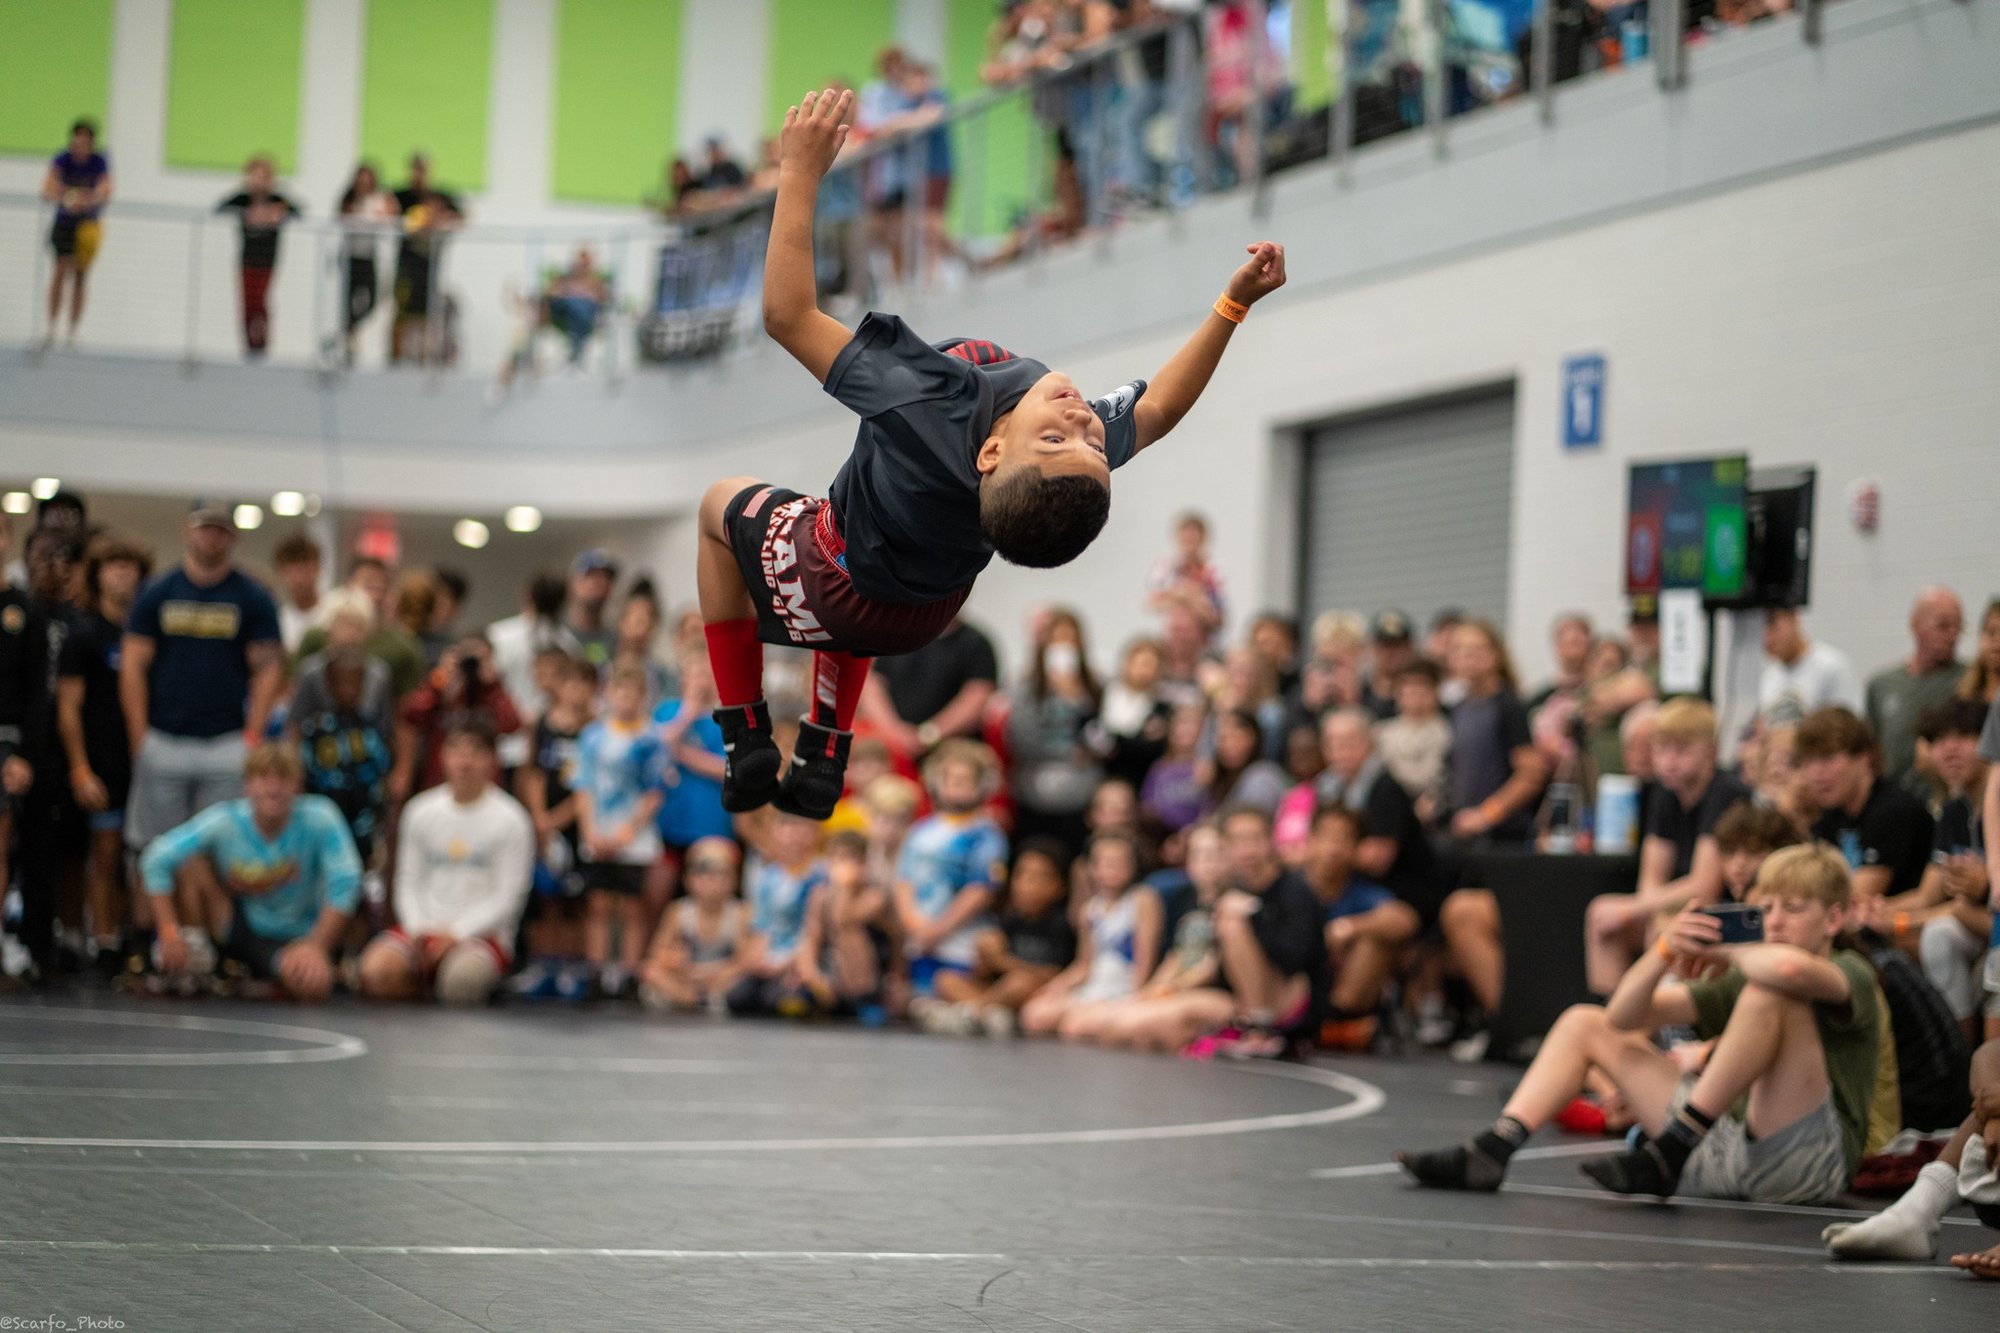 Wrestler competing in the backflip contest at a tournament